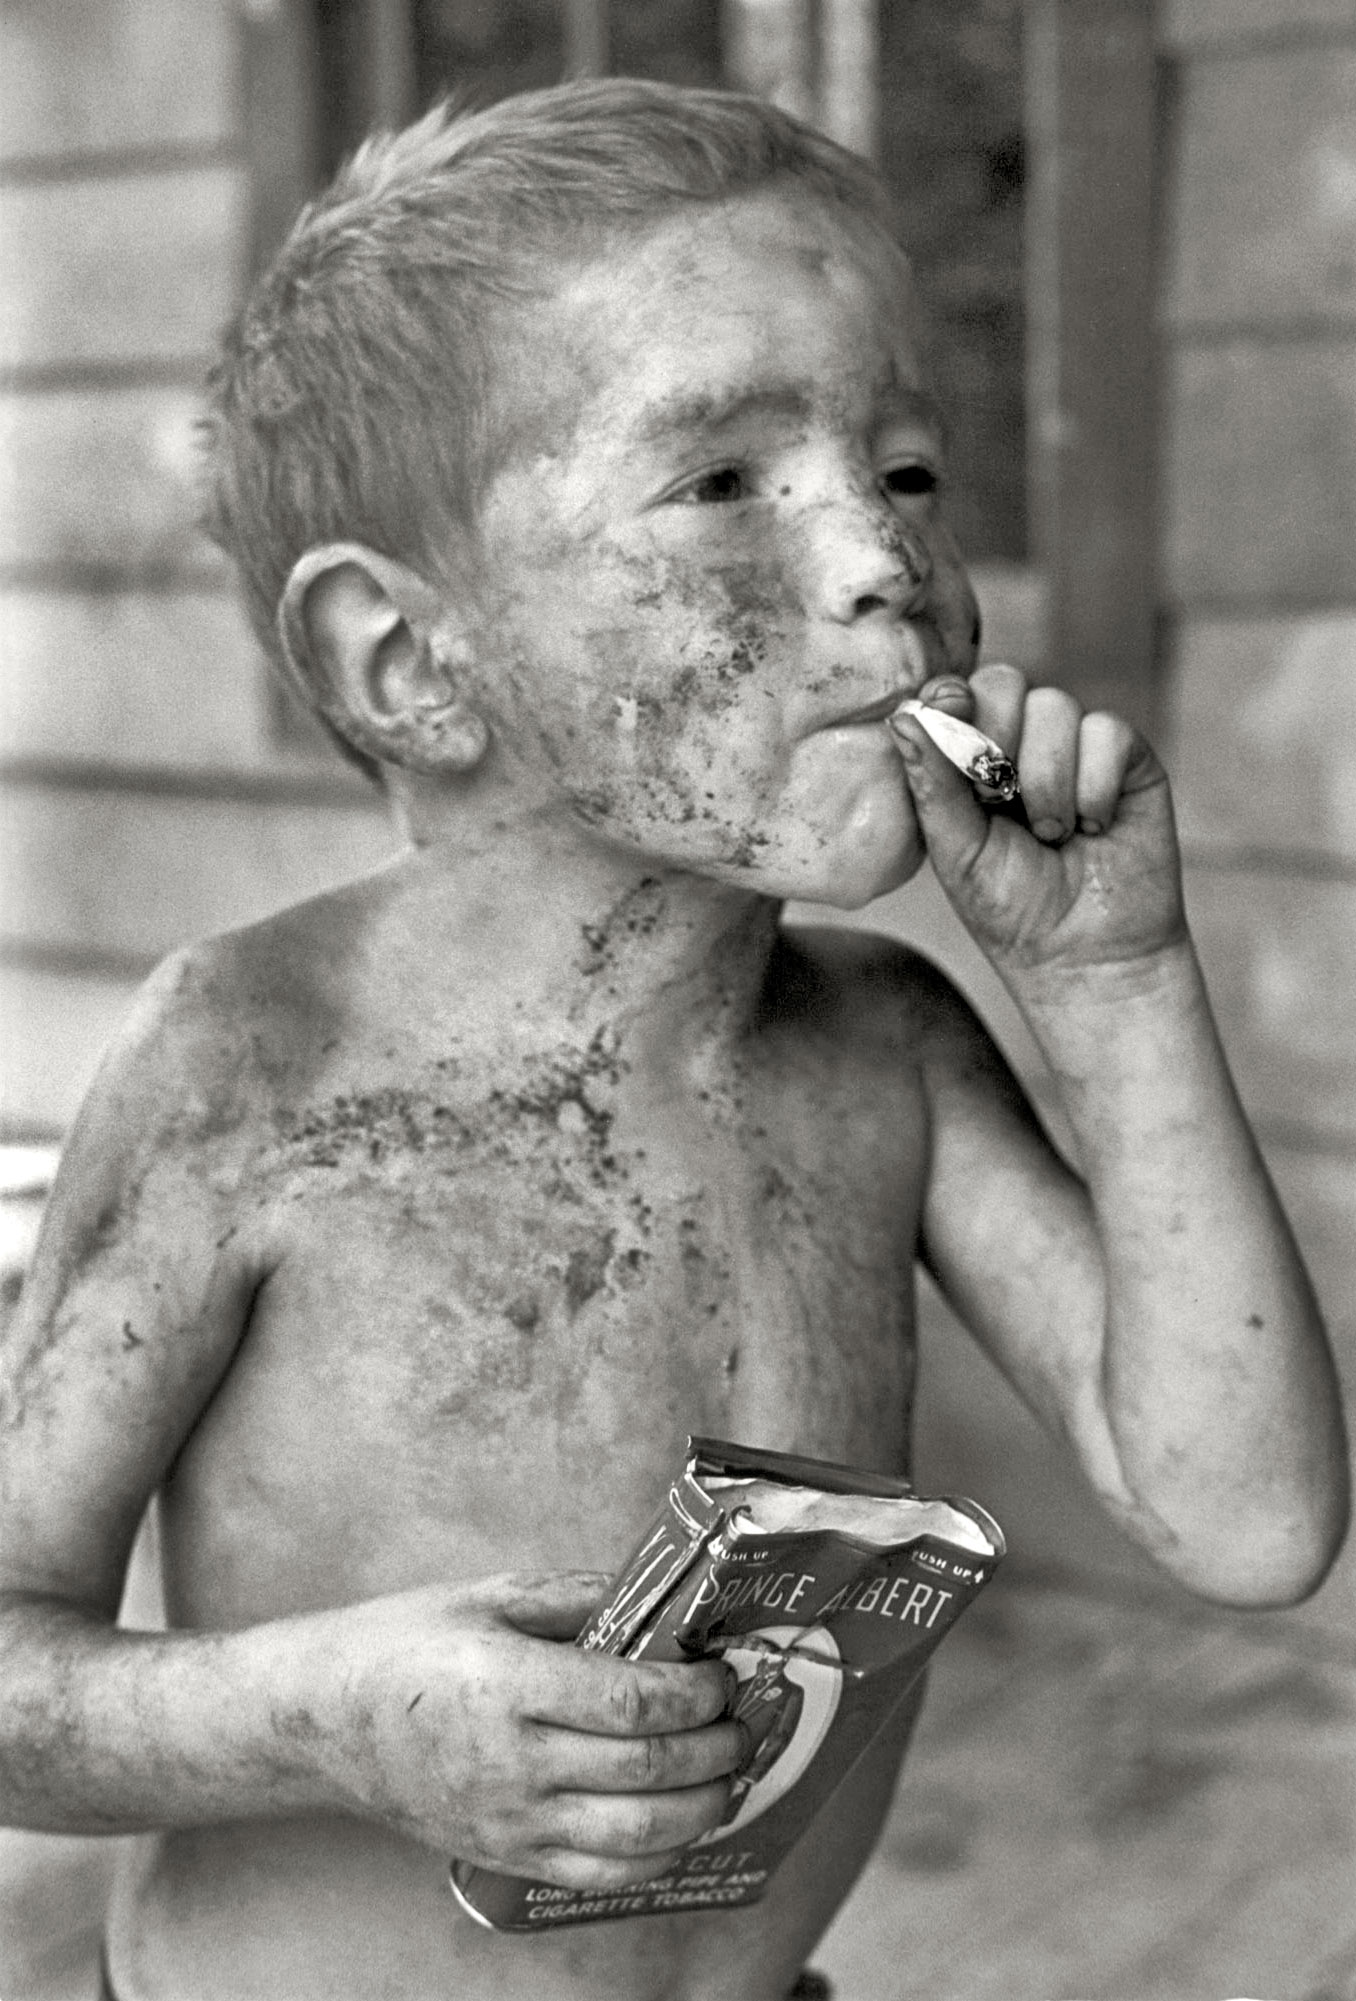 Unkempt child holding his tobacco pack and smoking a cigarette.